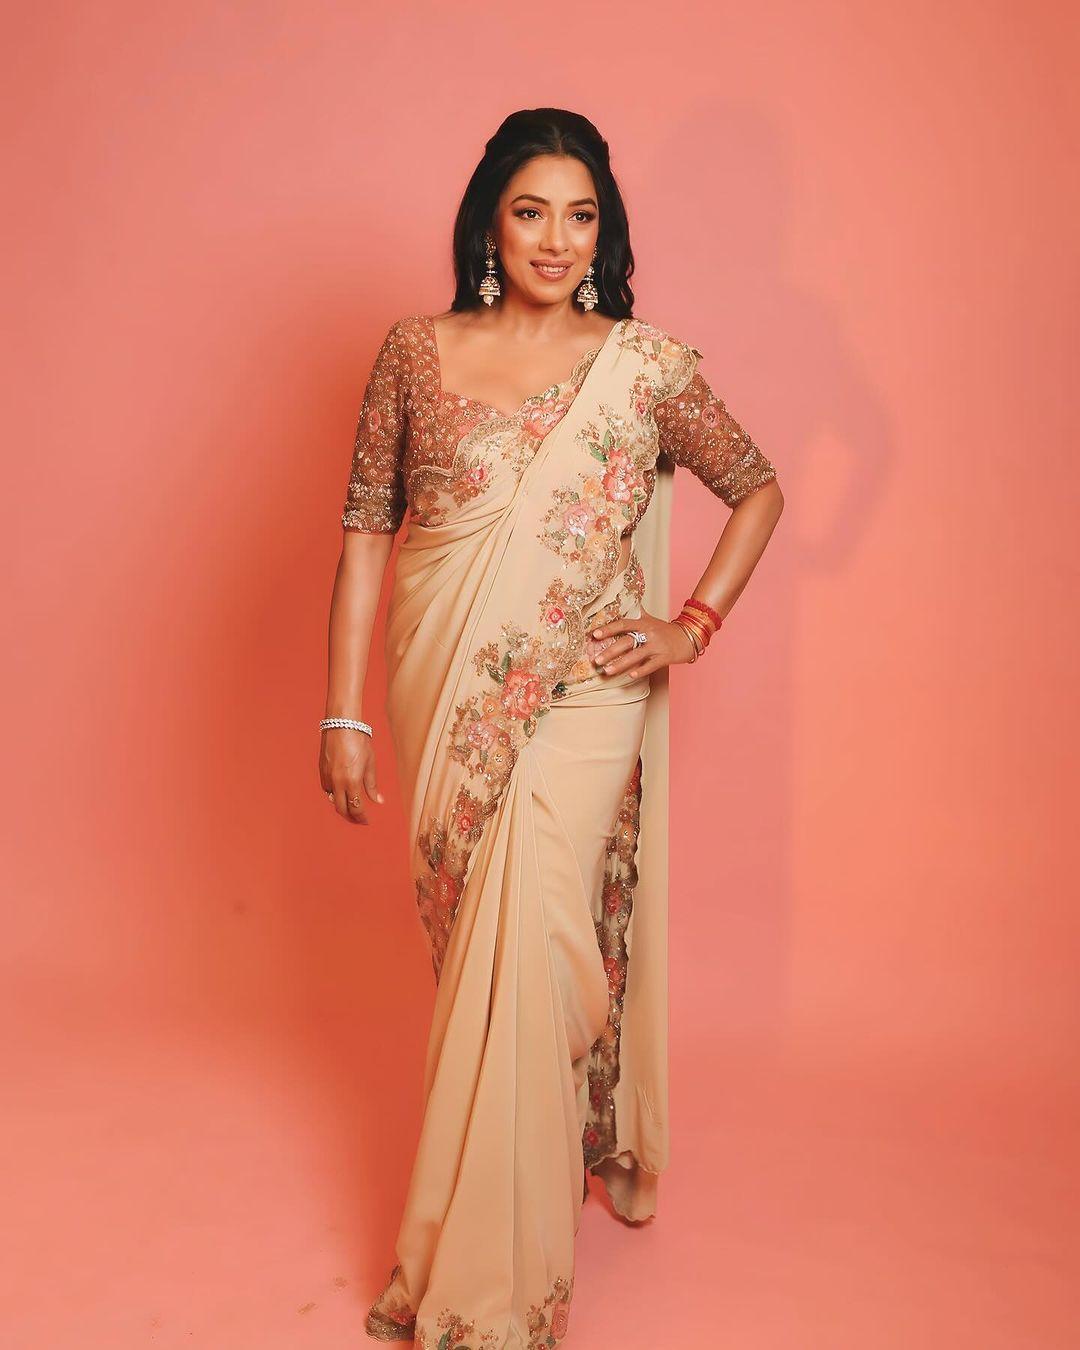 Got a friend's wedding to attend but confused about what to wear? Don't worry, we've got you covered. Rupali's this saree will help you ace your appearance